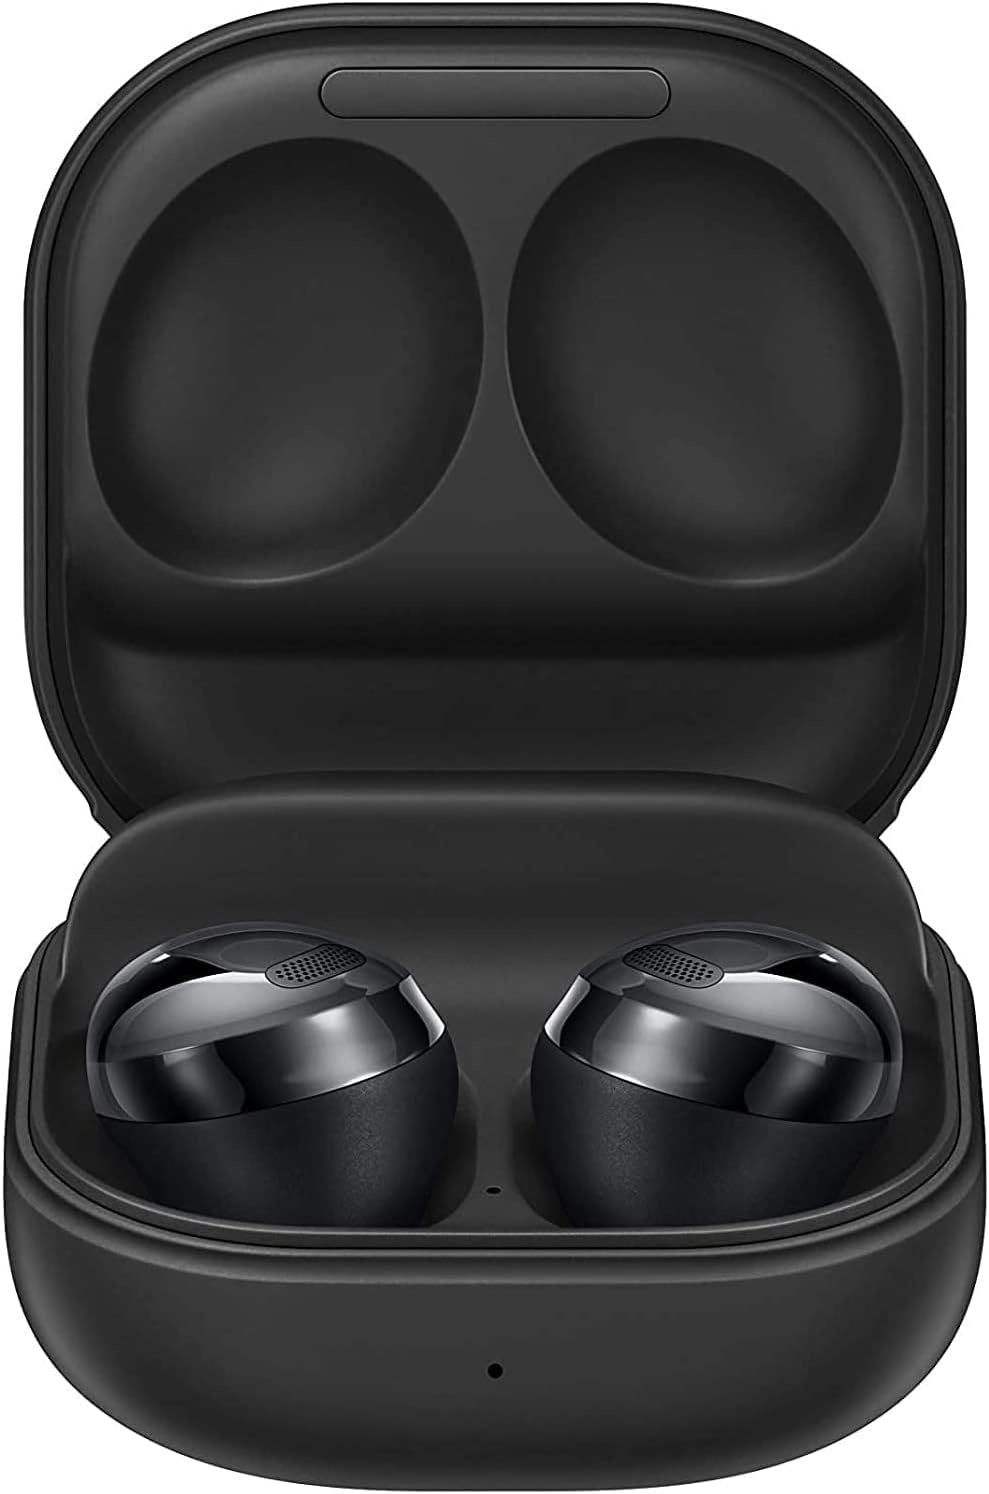 Samsung Galaxy Buds Pro in Phantom Black - Intelligent Active Noise Cancellation for personalized sound control. 8806092005723